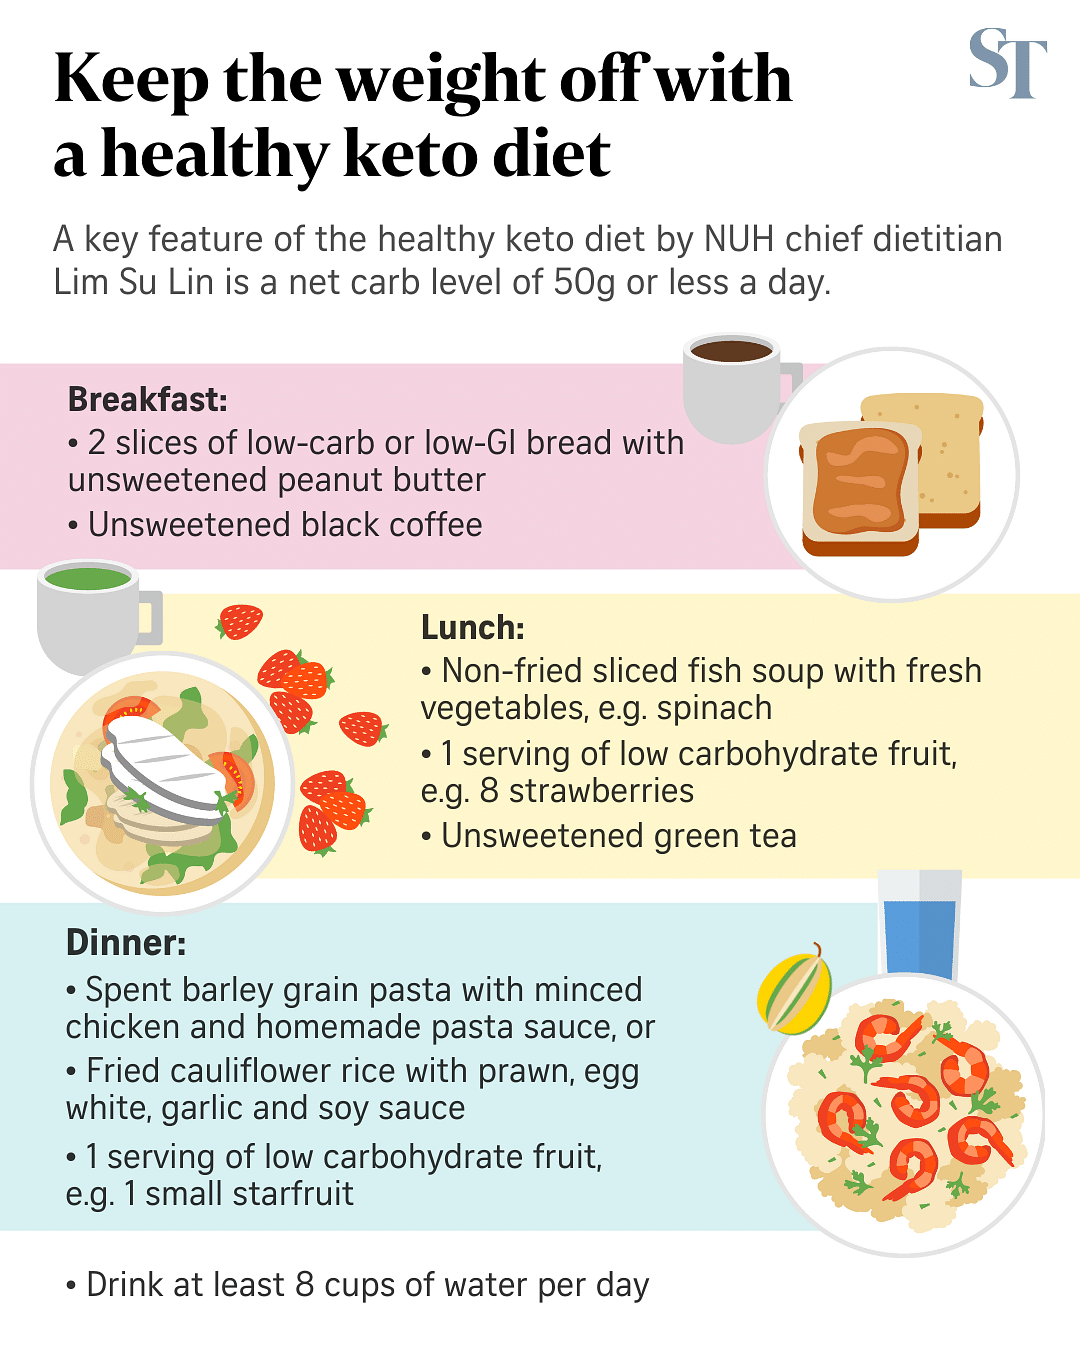 NUH’s healthy keto diet leads to weight loss without increasing bad ...